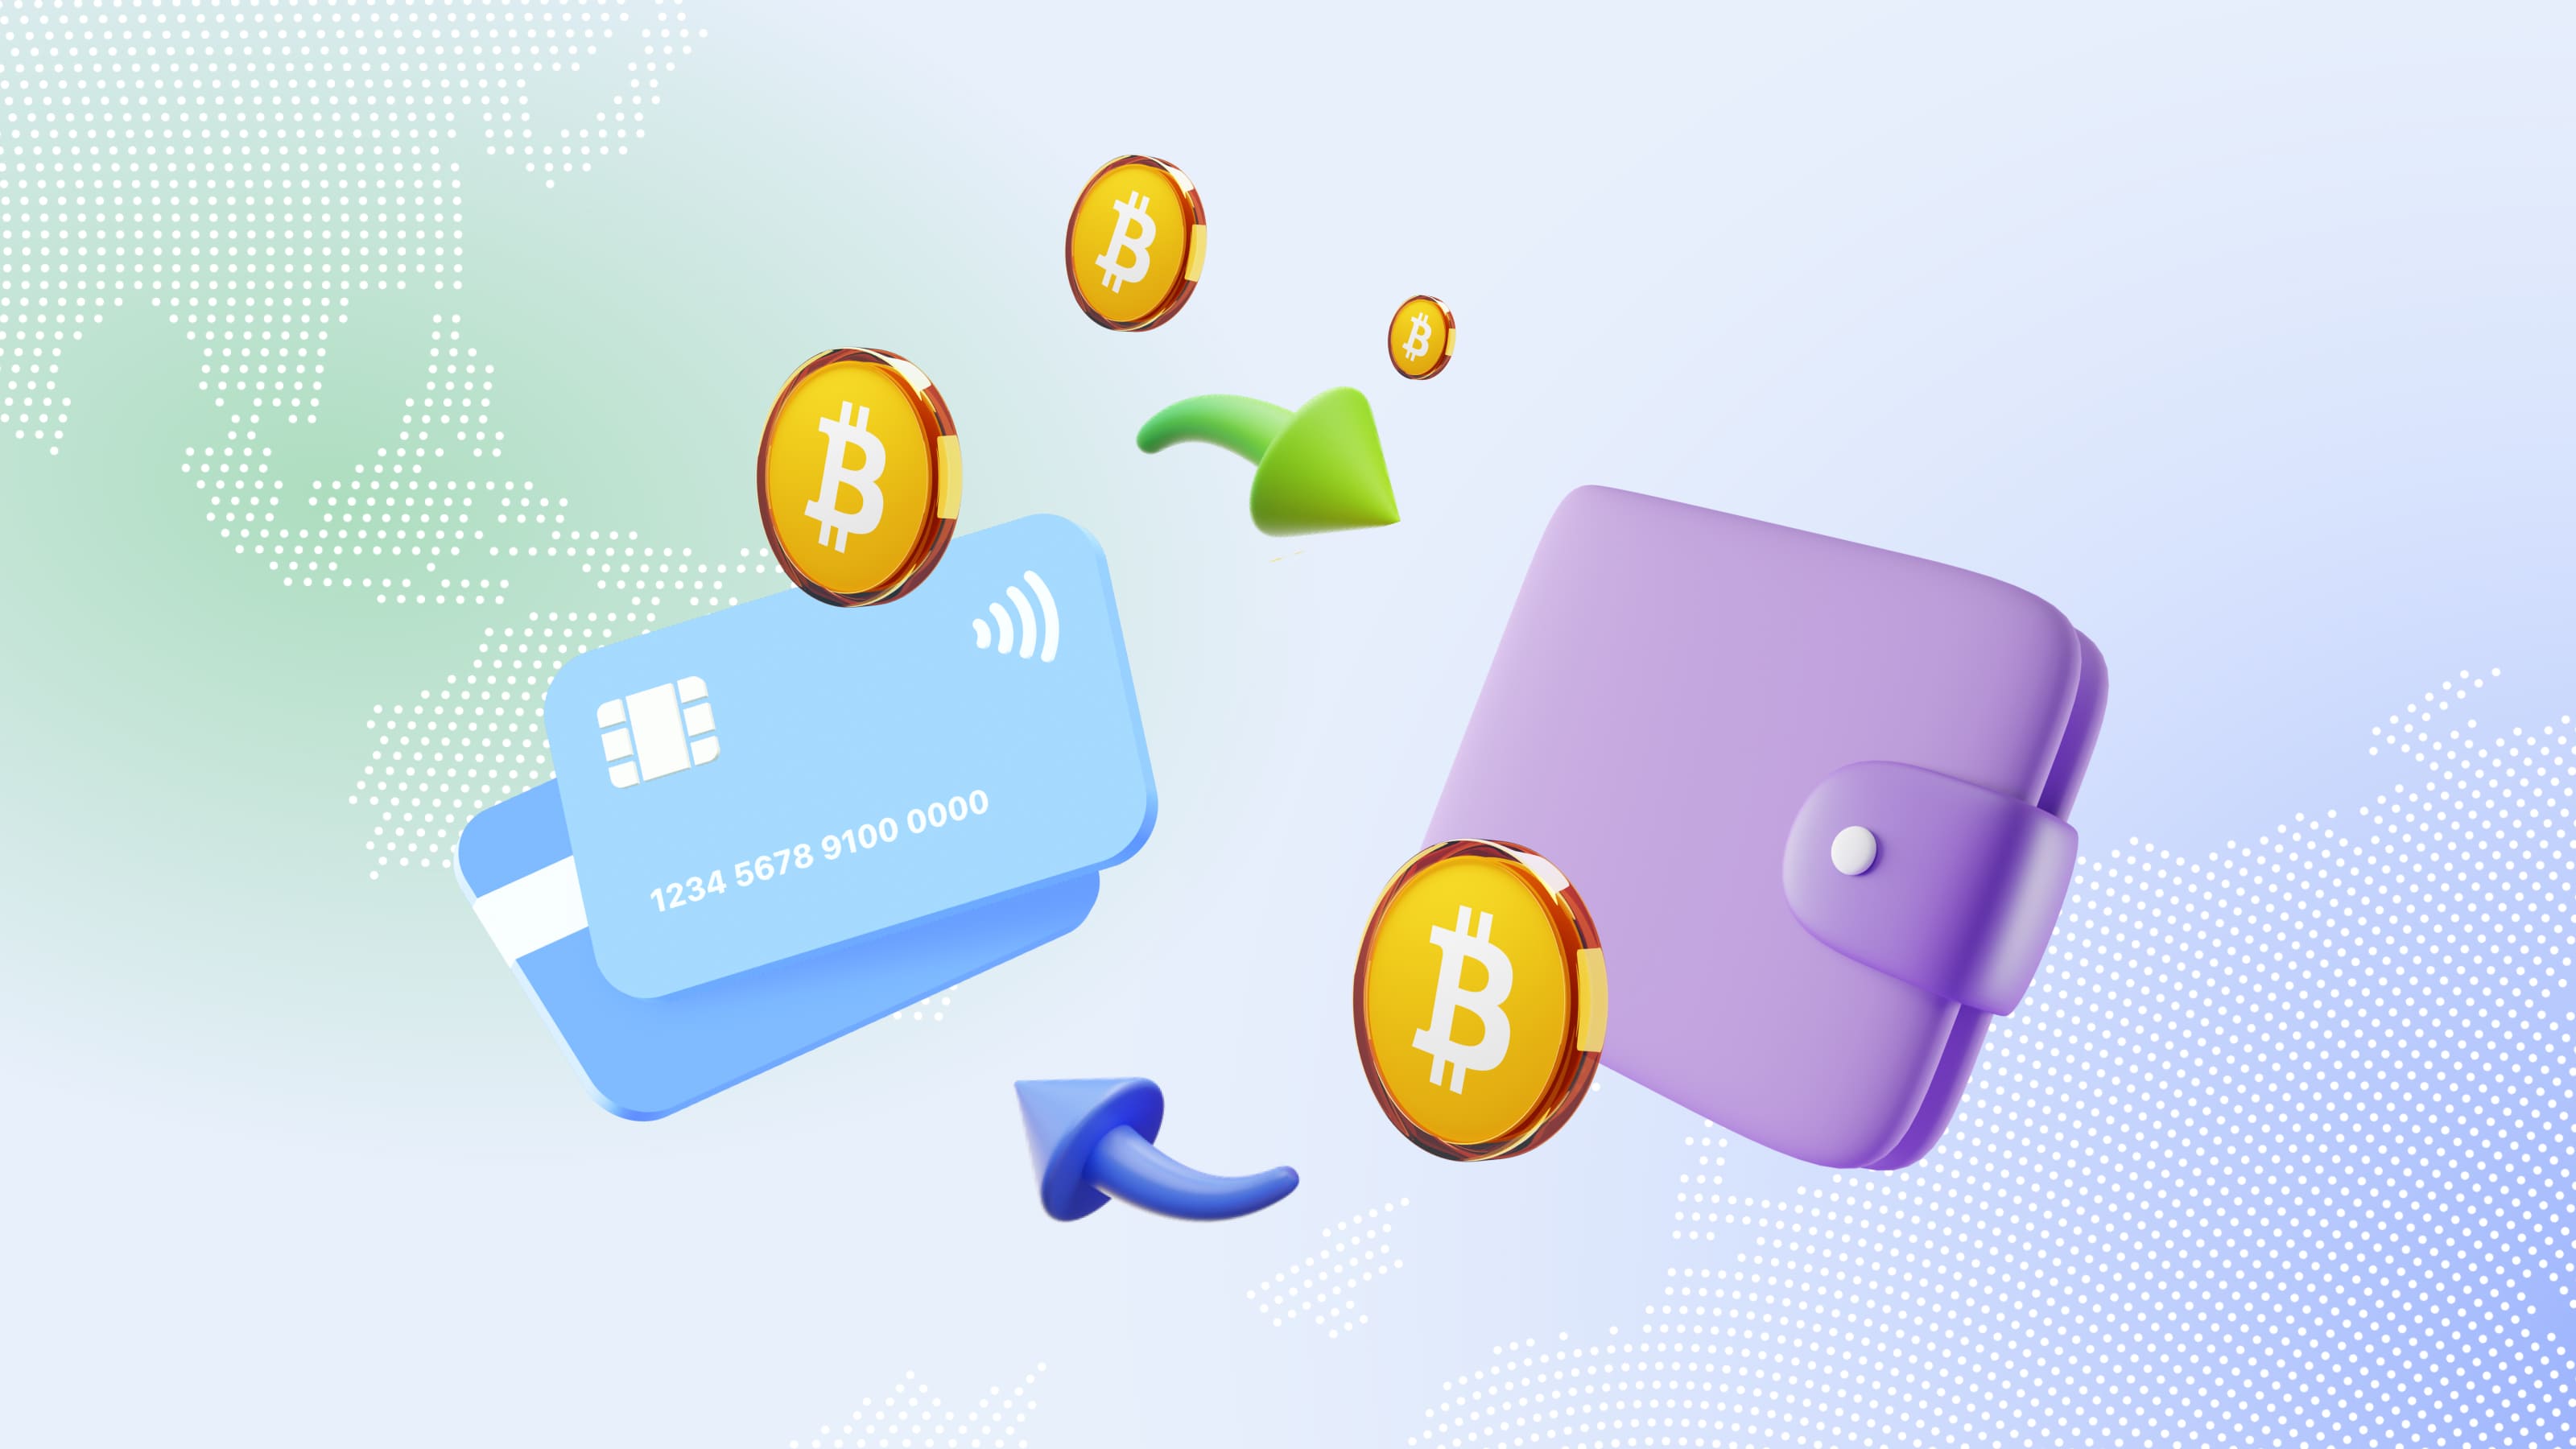 One of the key benefits of buying cryptocurrency from a card is convenience.